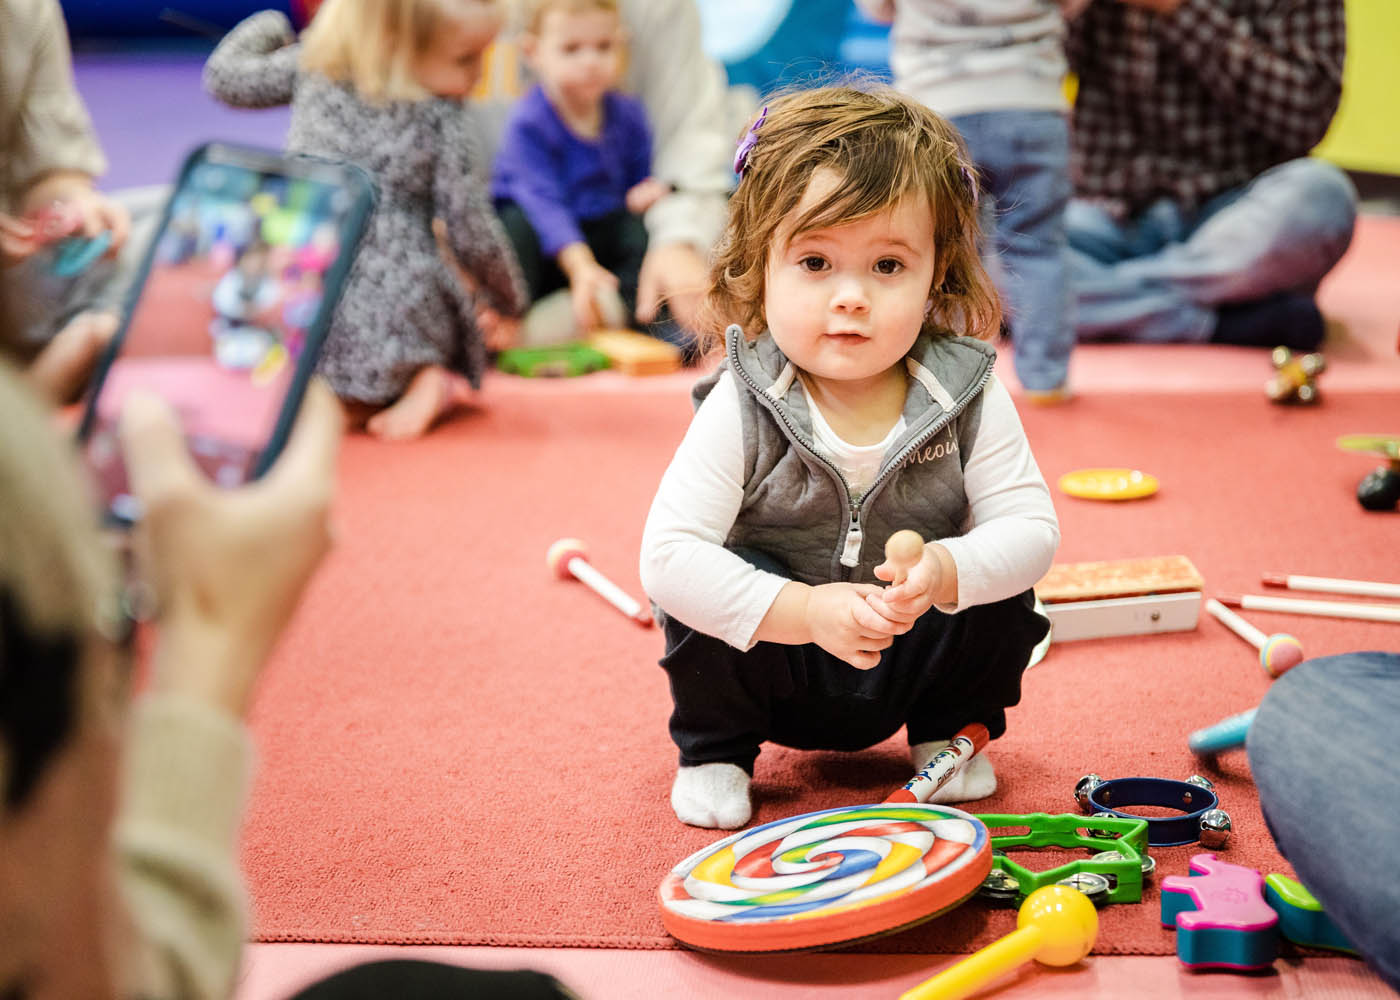 An adorable girl playing with musical instruments, an excellent activity for kids at Romp n' Roll Pittsburgh birthday parties.